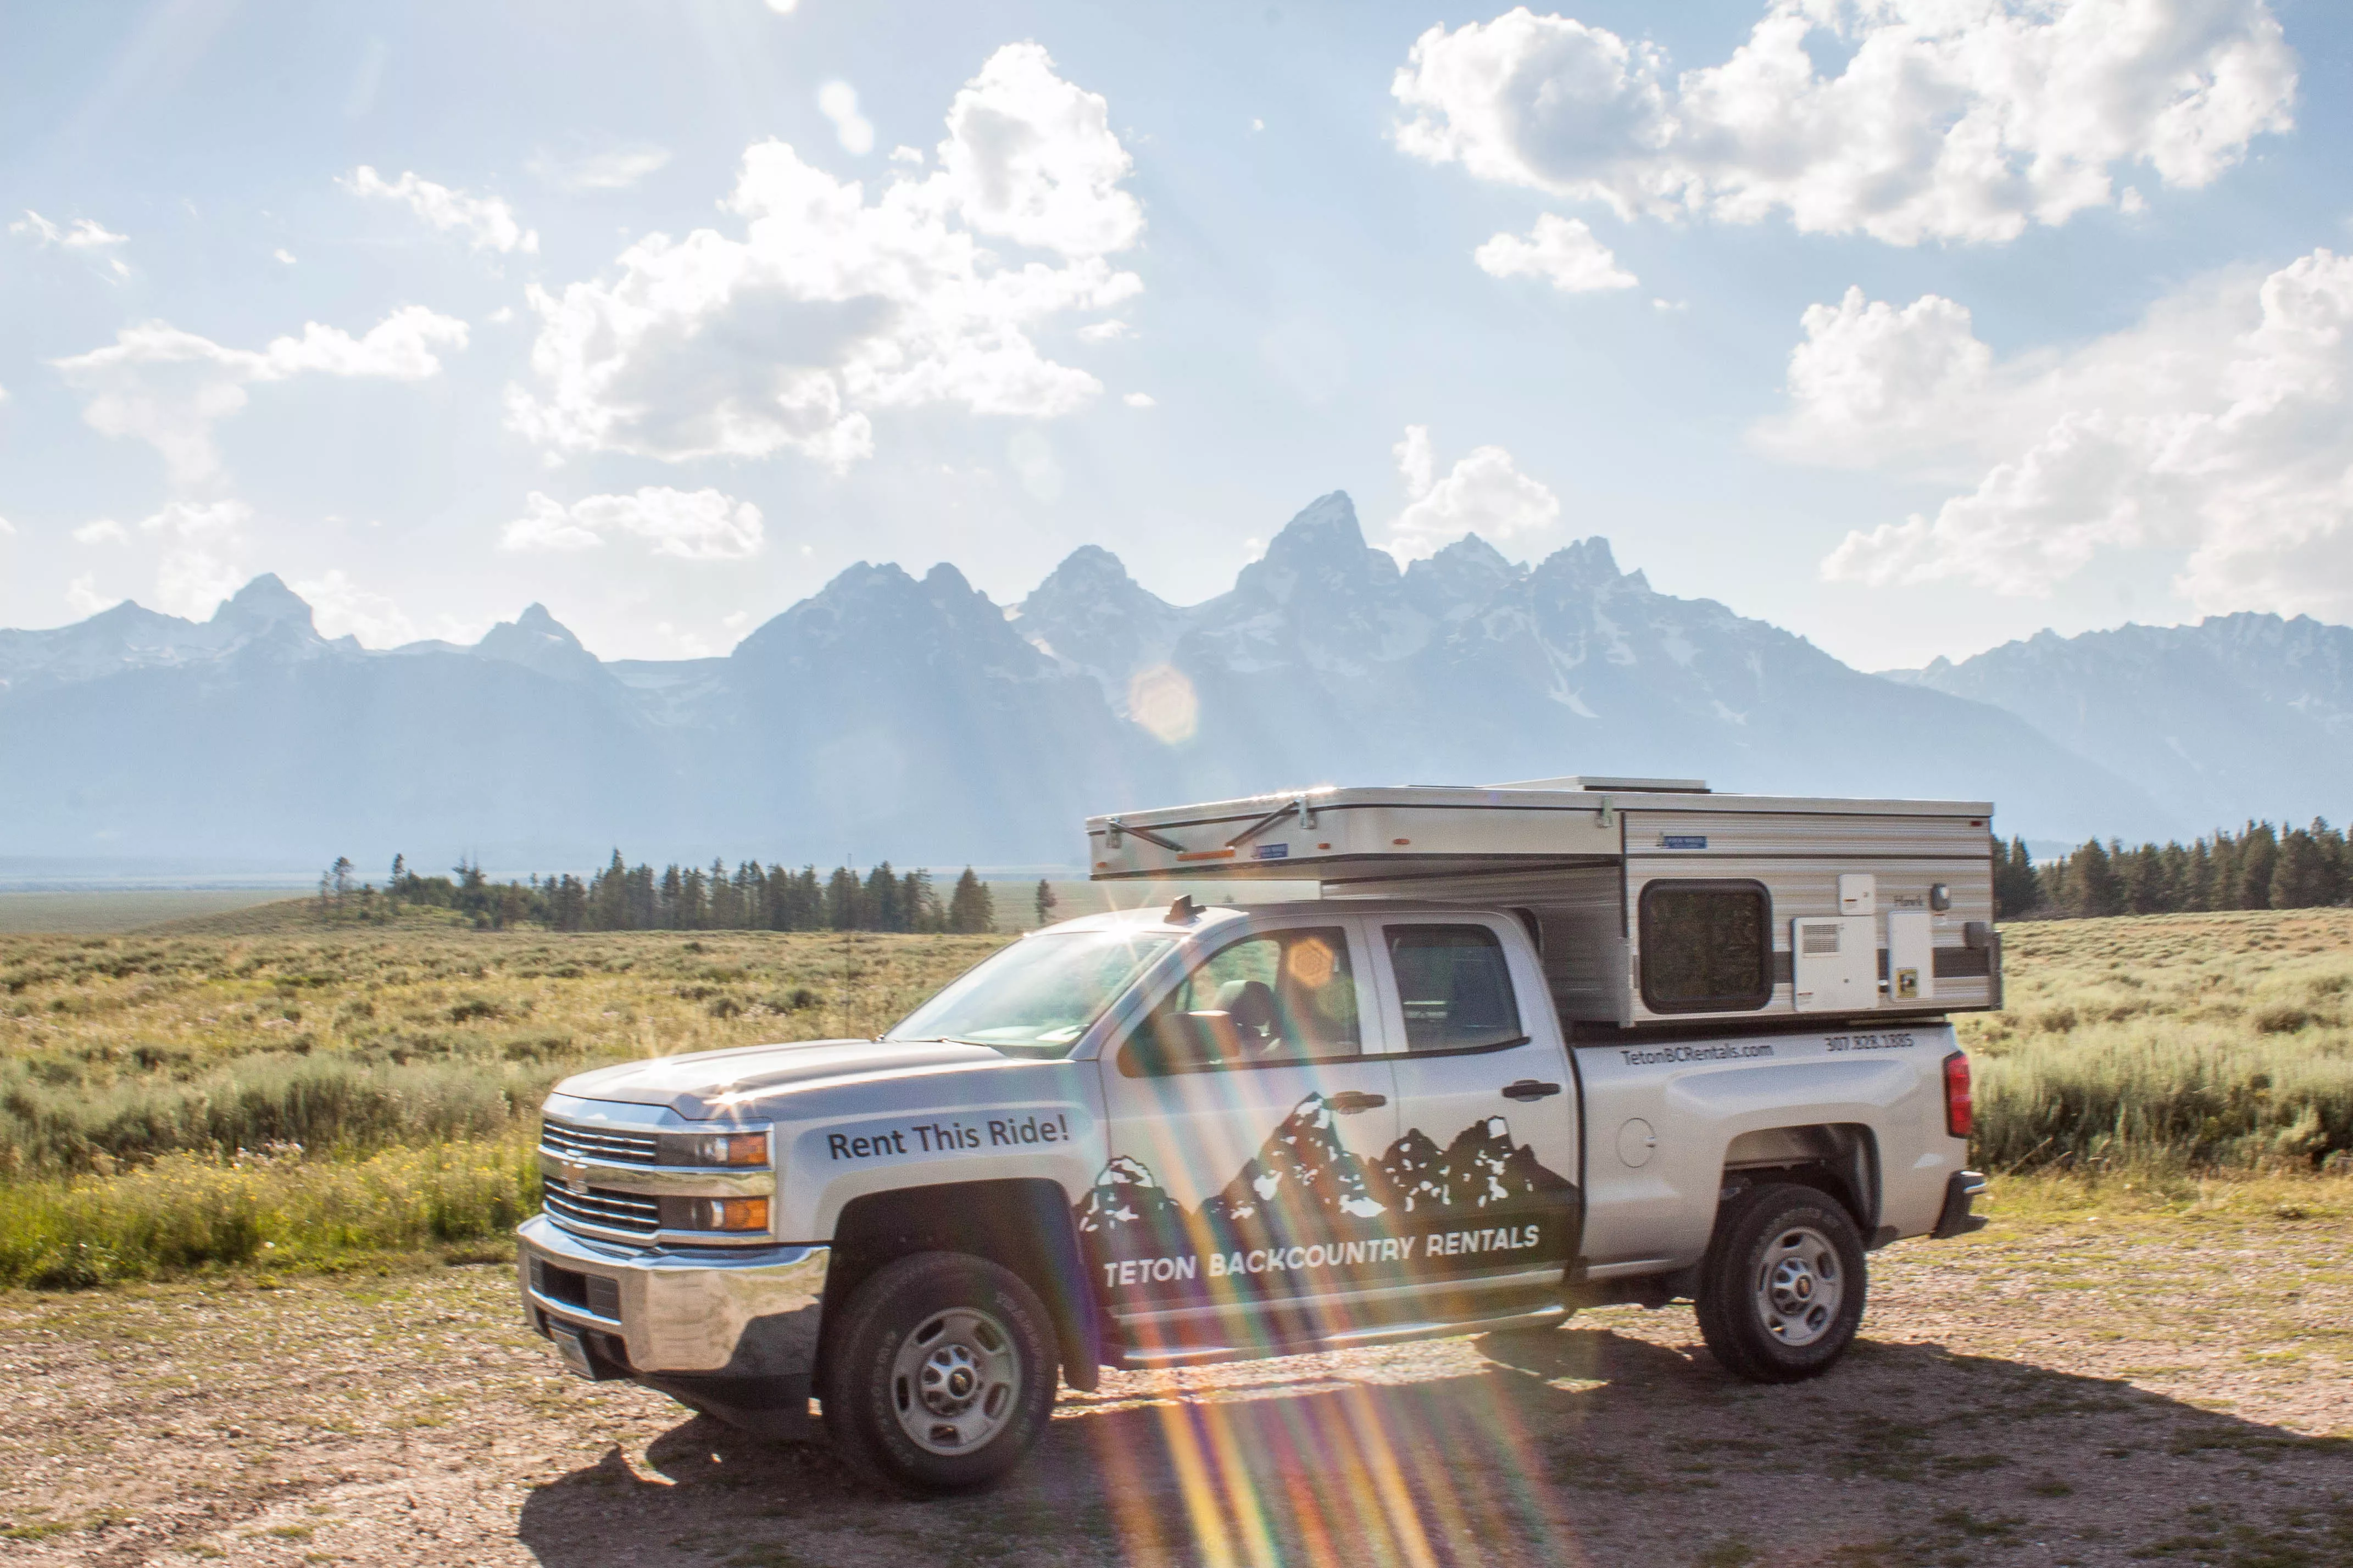 Teton Backcountry Rentals in USA, North America | Trekking & Hiking - Rated 0.9